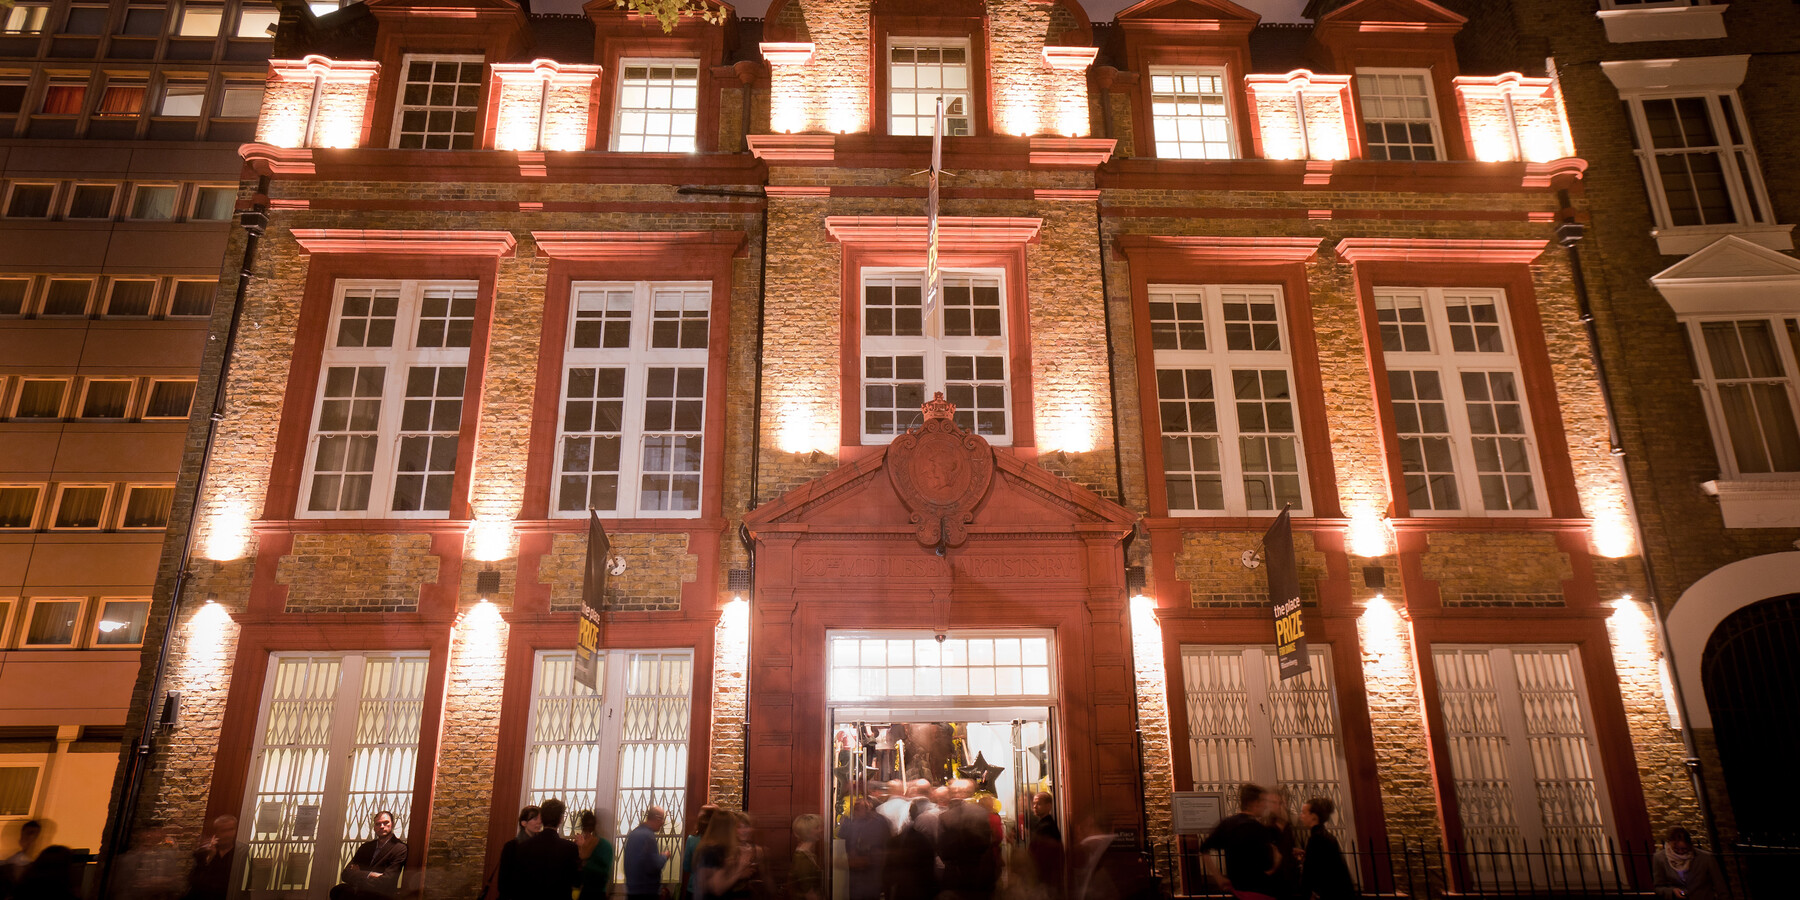 People gather outside The Place, a beautiful brick venue in London, at night.